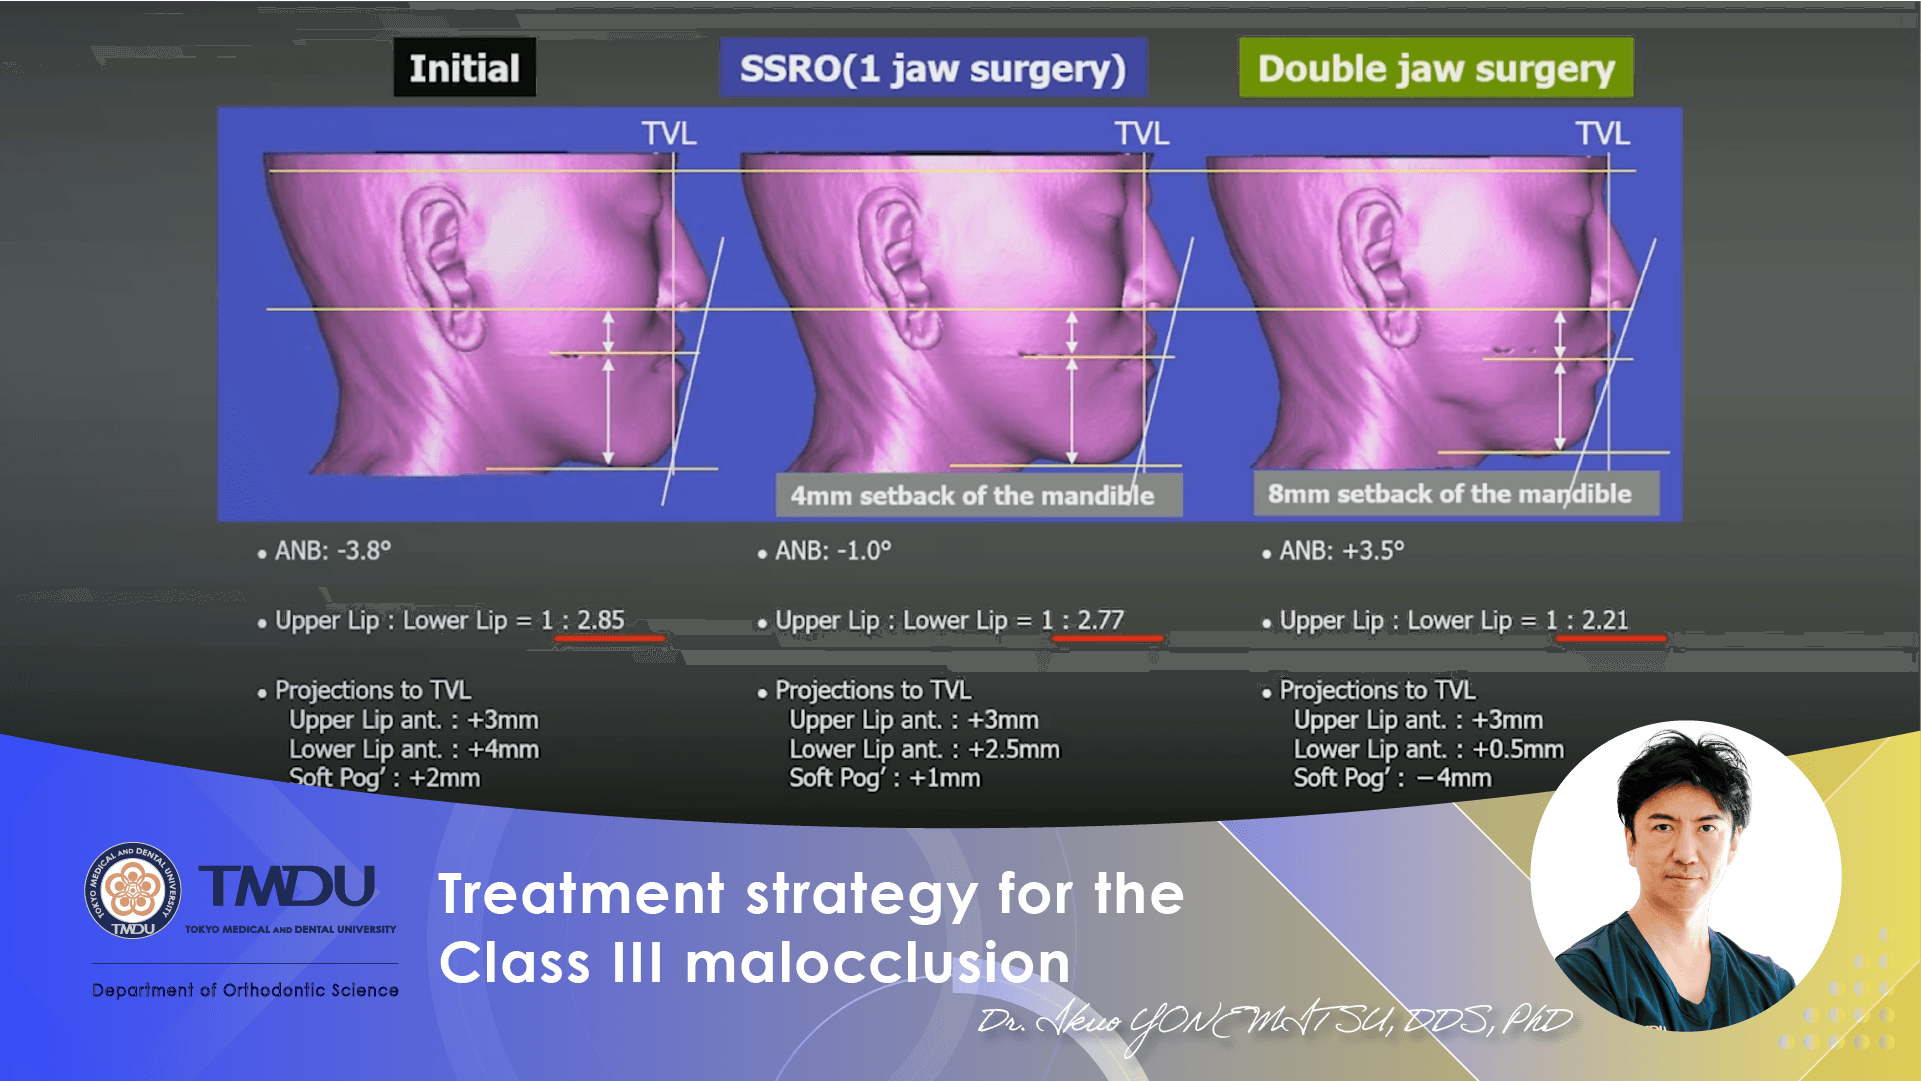 Treatment strategy for the Class III malocclusion